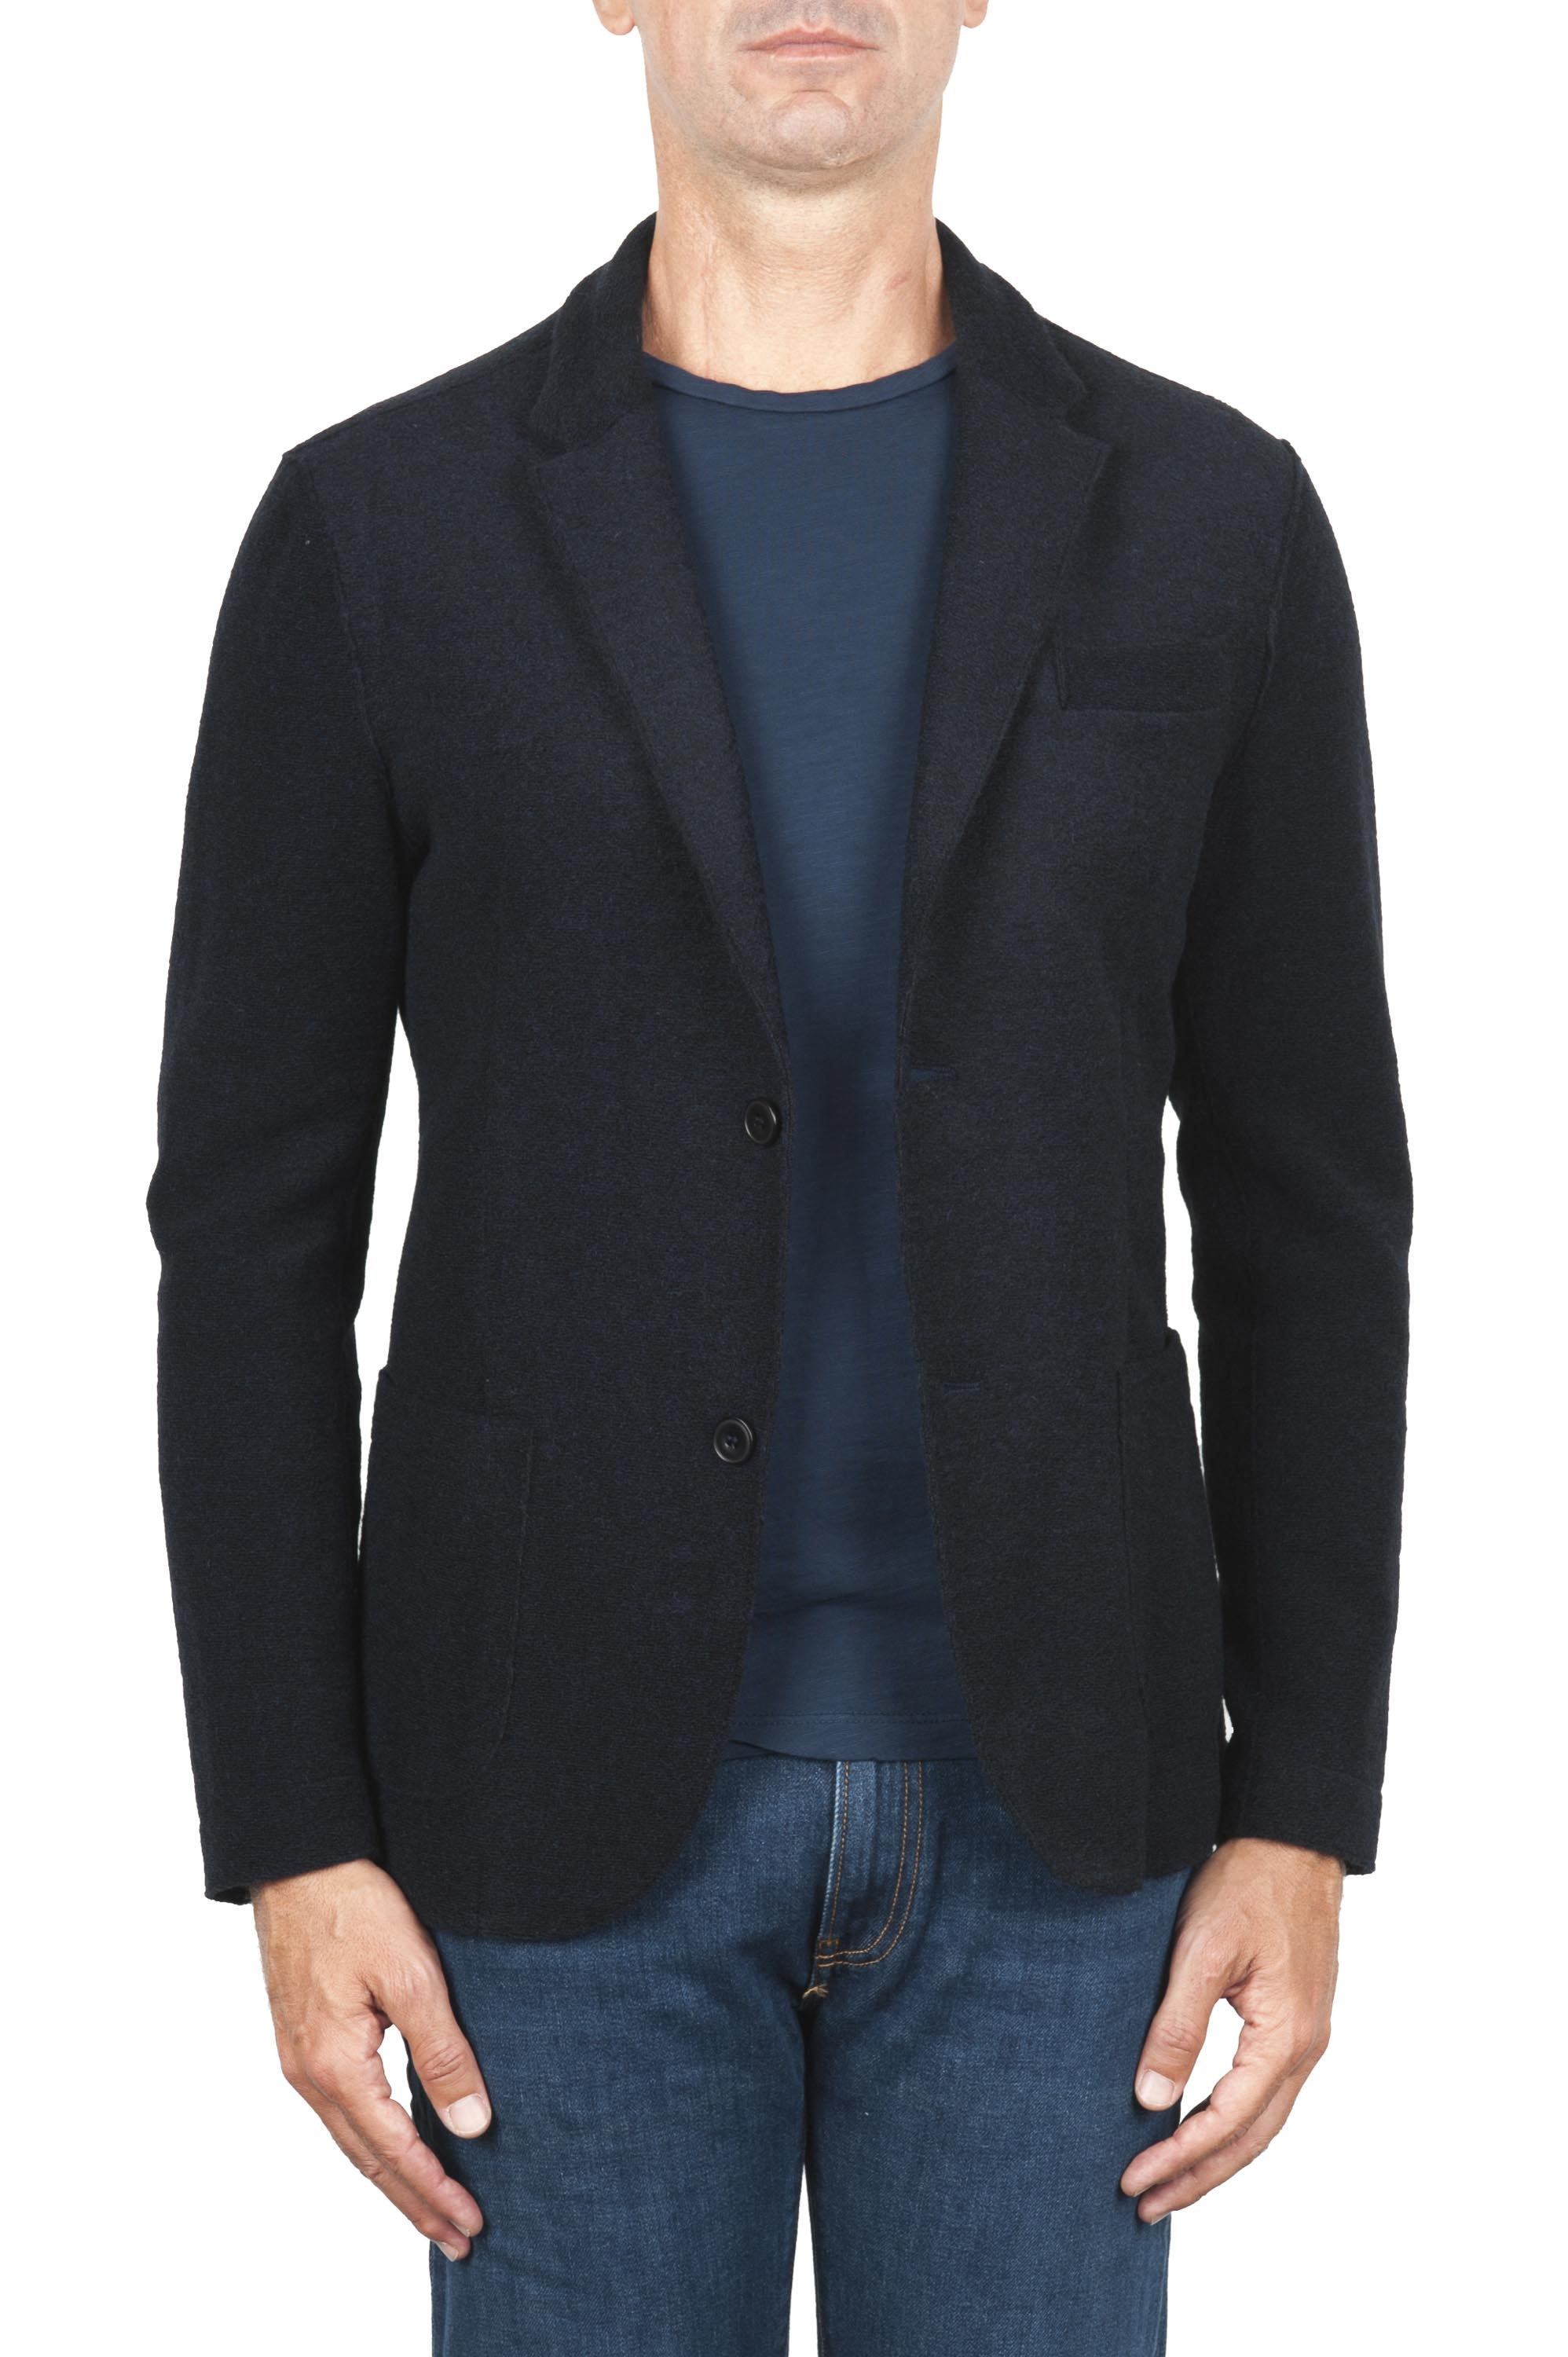 SBU 03100_2020AW Black wool blend sport jacket unconstructed and unlined 01